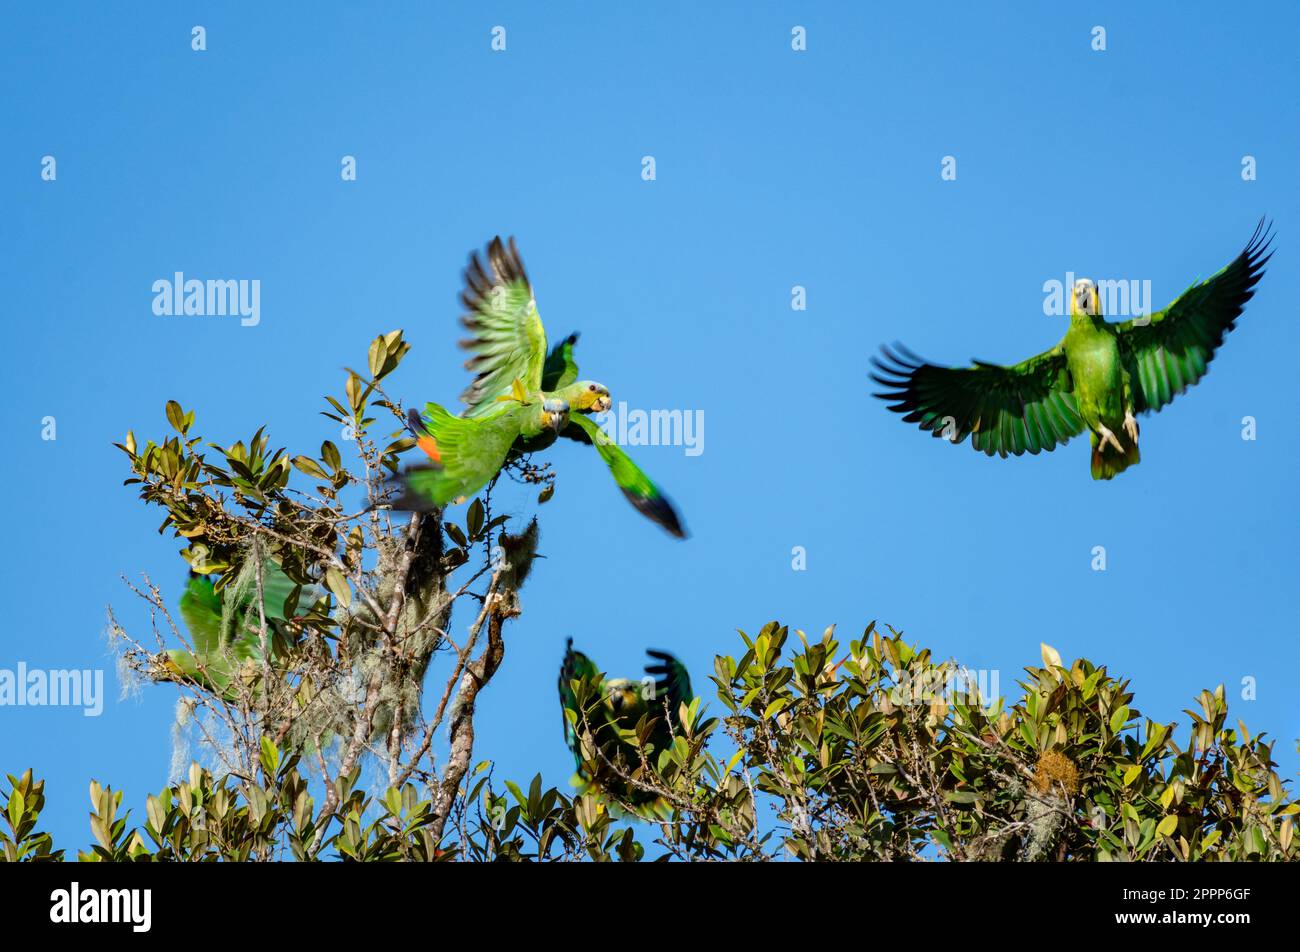 Several Orange-winged Amazon parrots flying and landing in a tree in a Caribbean rainforest. Stock Photo